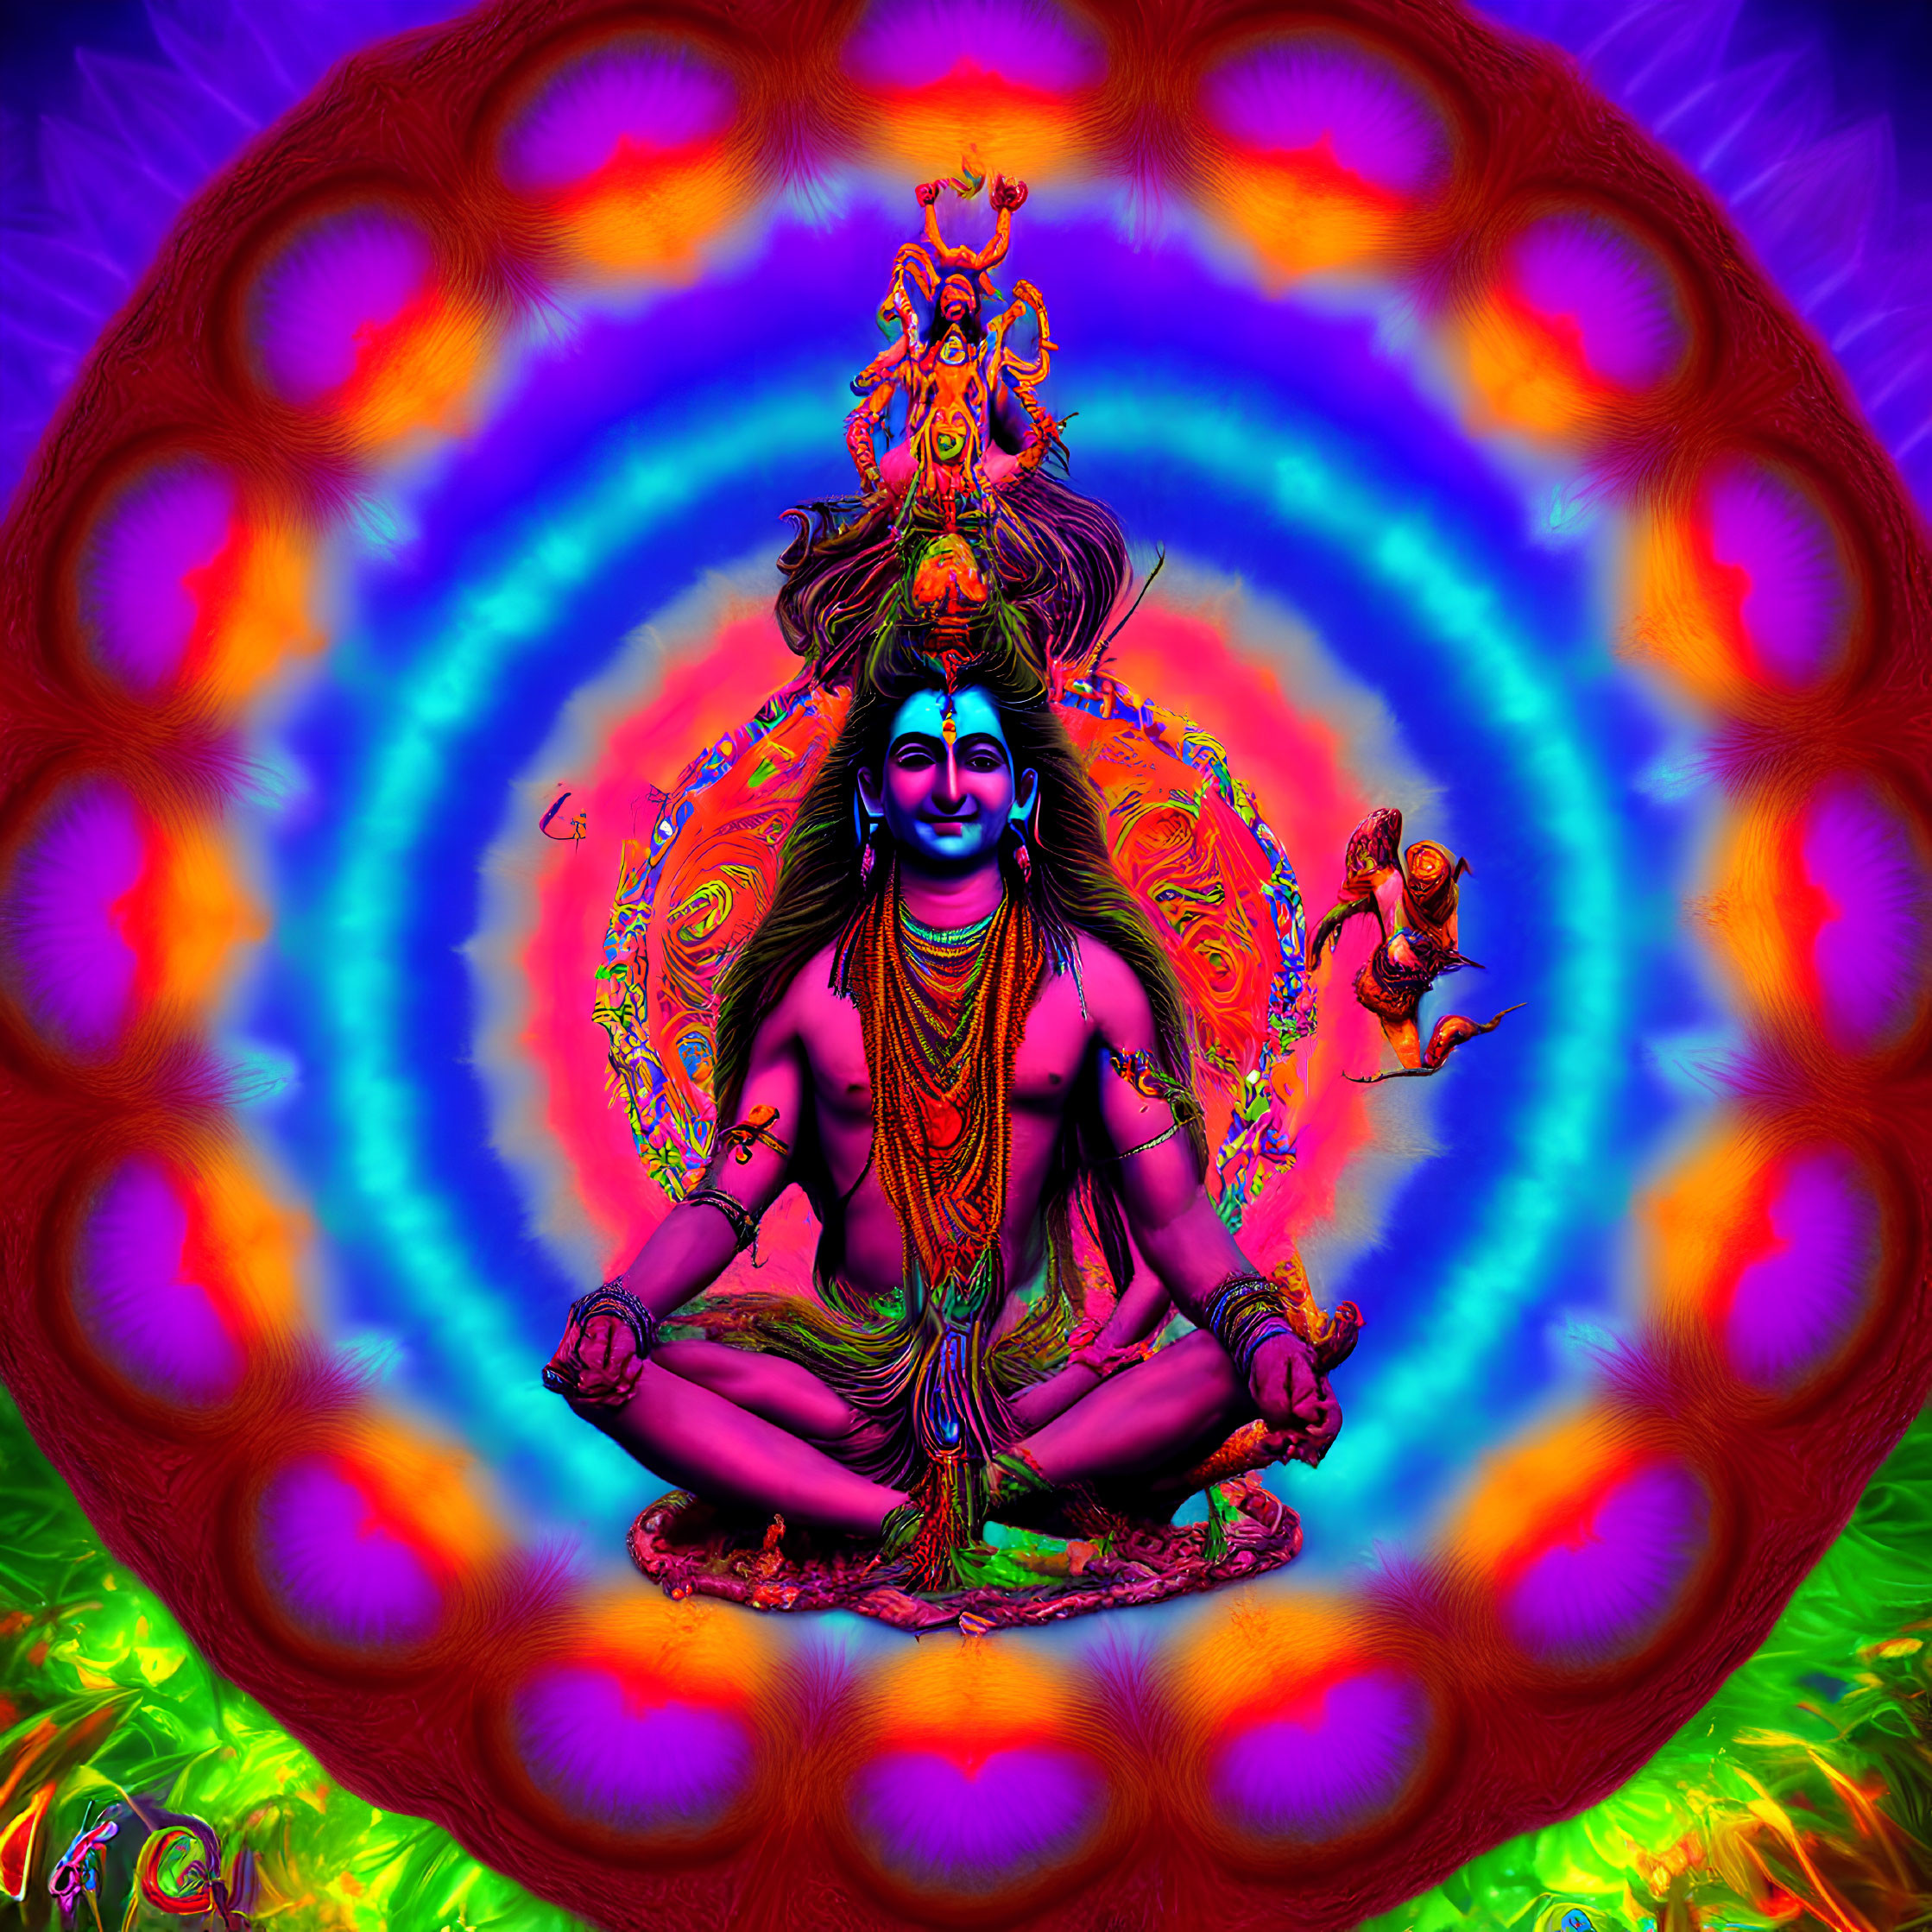 Colorful digital art: Lord Shiva meditating with psychedelic patterns and Hanuman figure